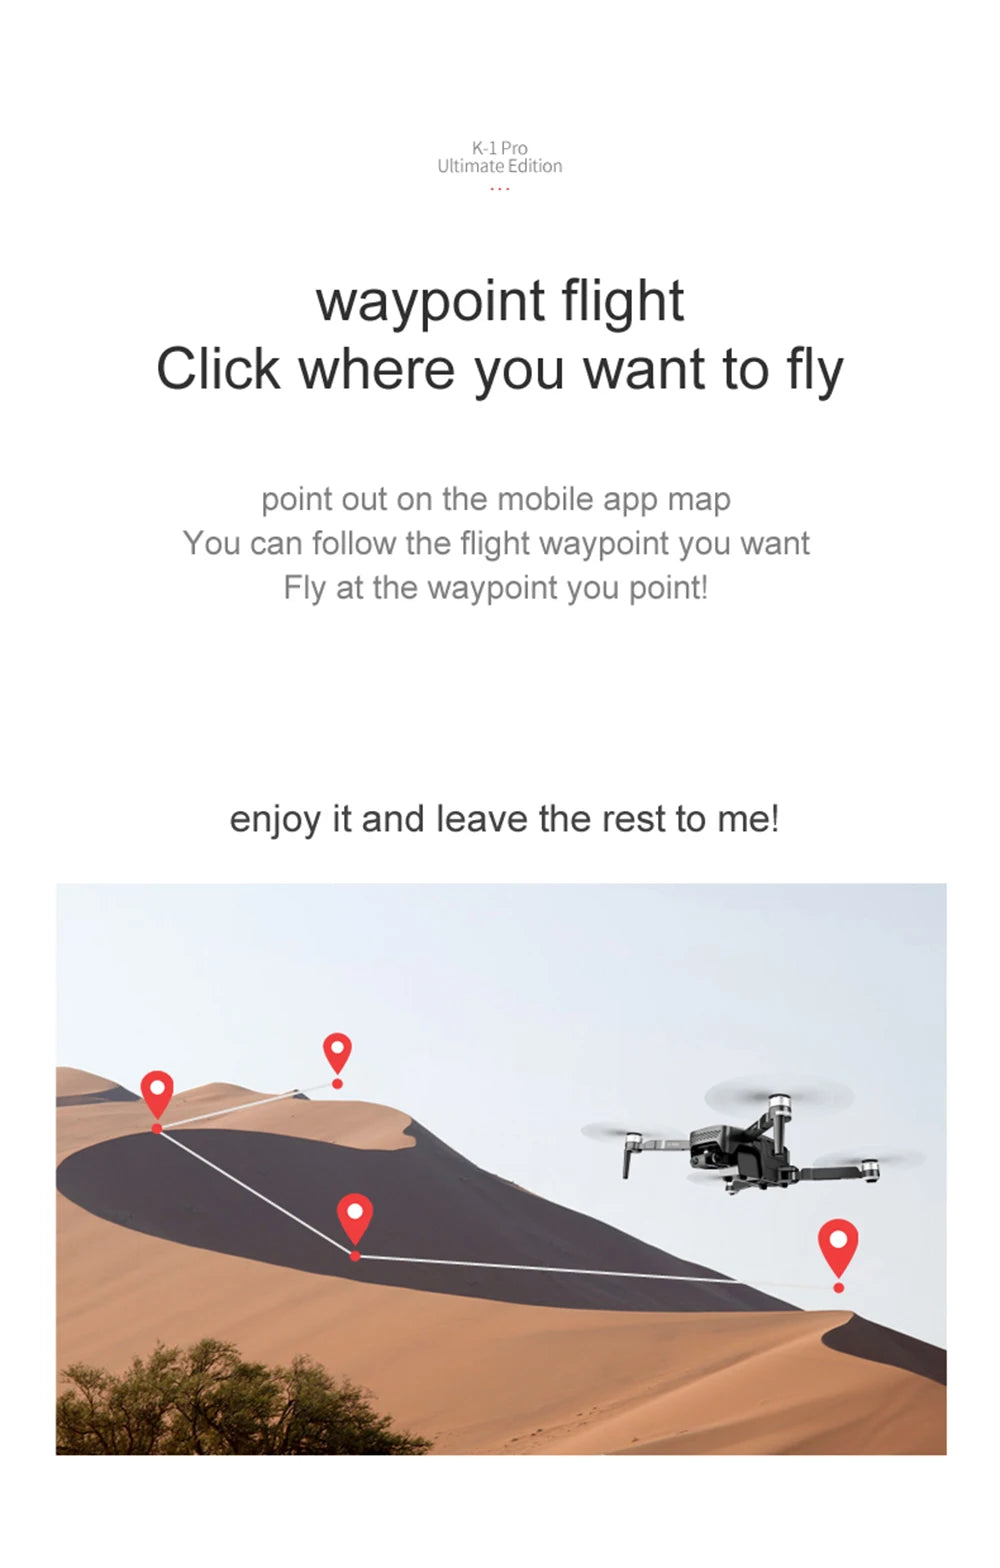 VISUO ZEN K1 PRO Drone, K-1Pro Ultimate Edition waypoint flight Click where you want to fly out on the mobile app